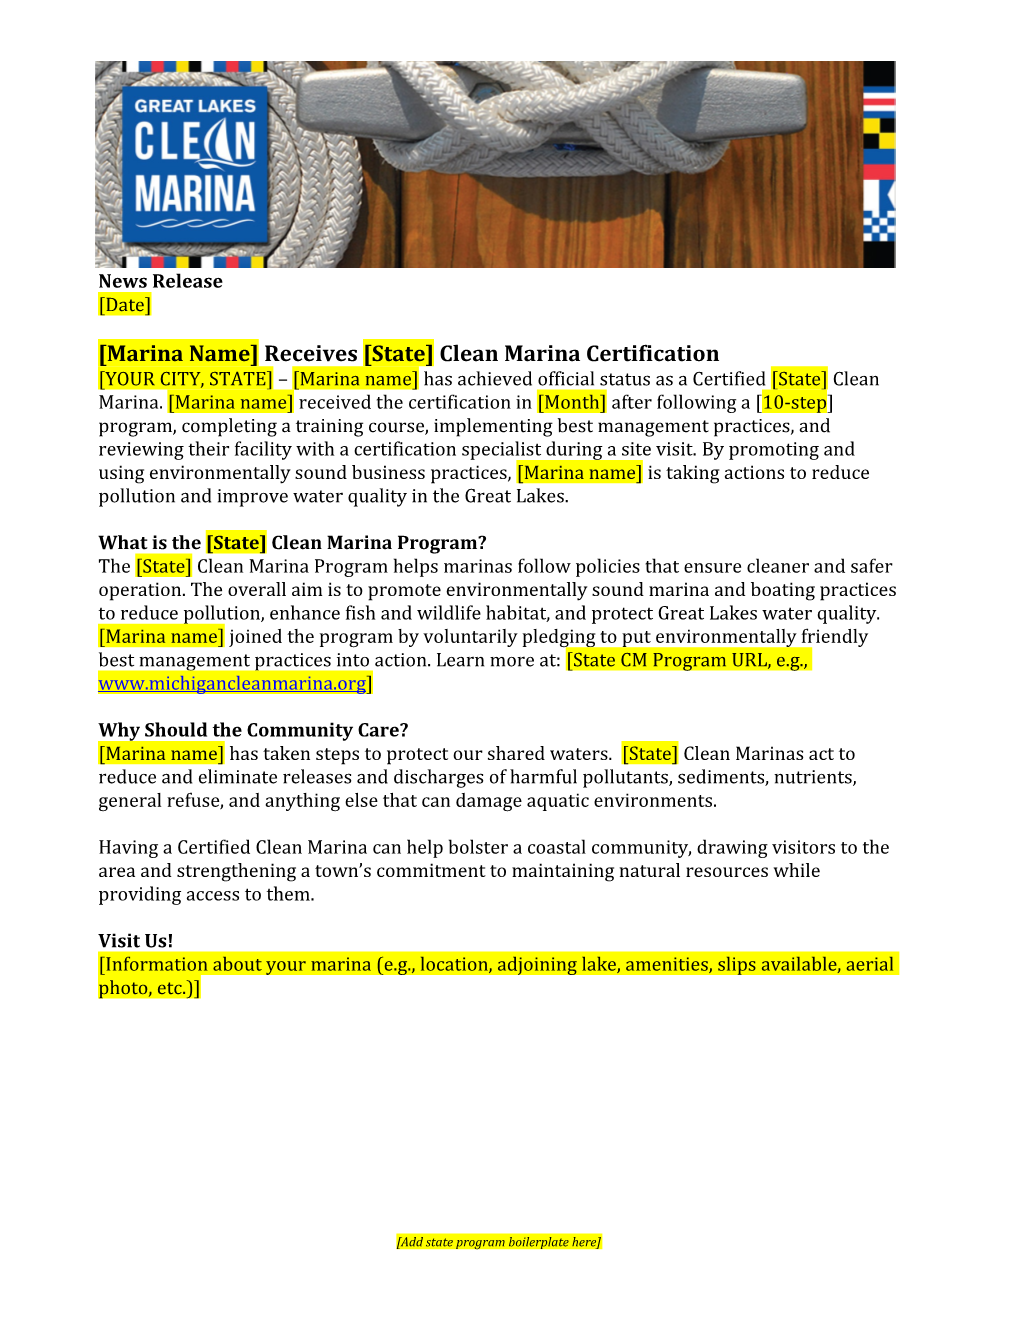 Marina Name Receives State Clean Marina Certification